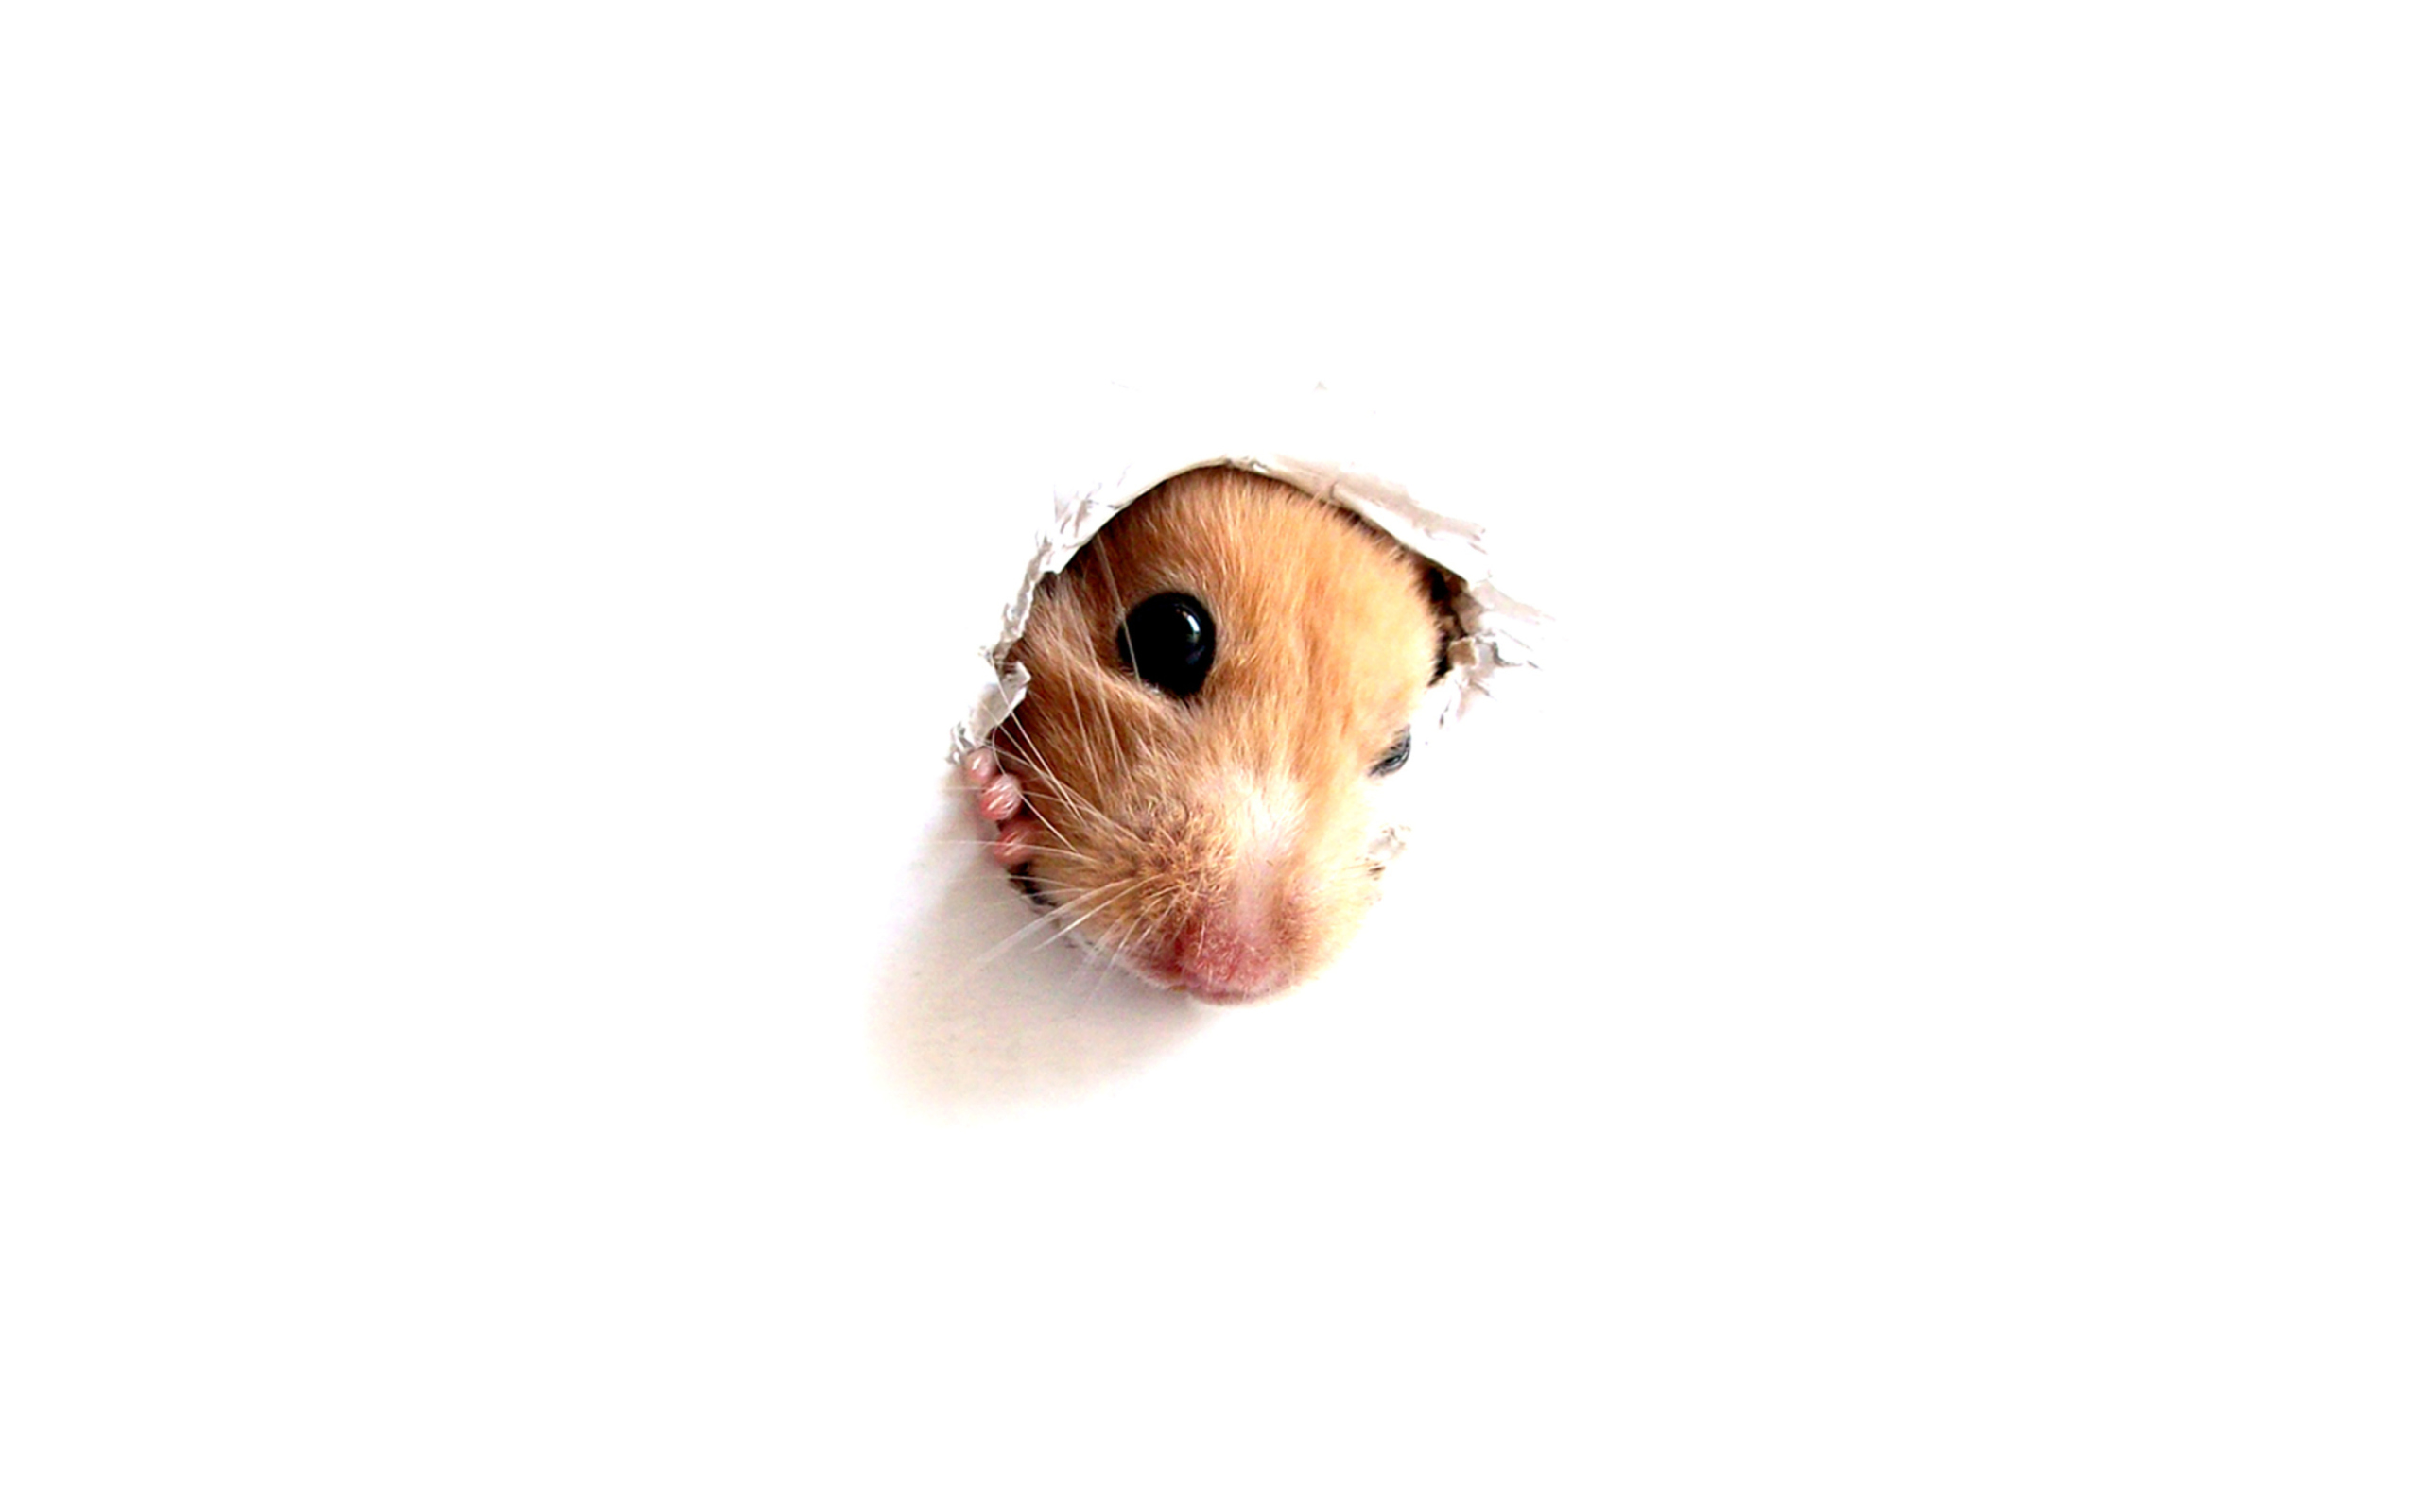 Hamster In Hole On Your Screen wallpaper 2560x1600